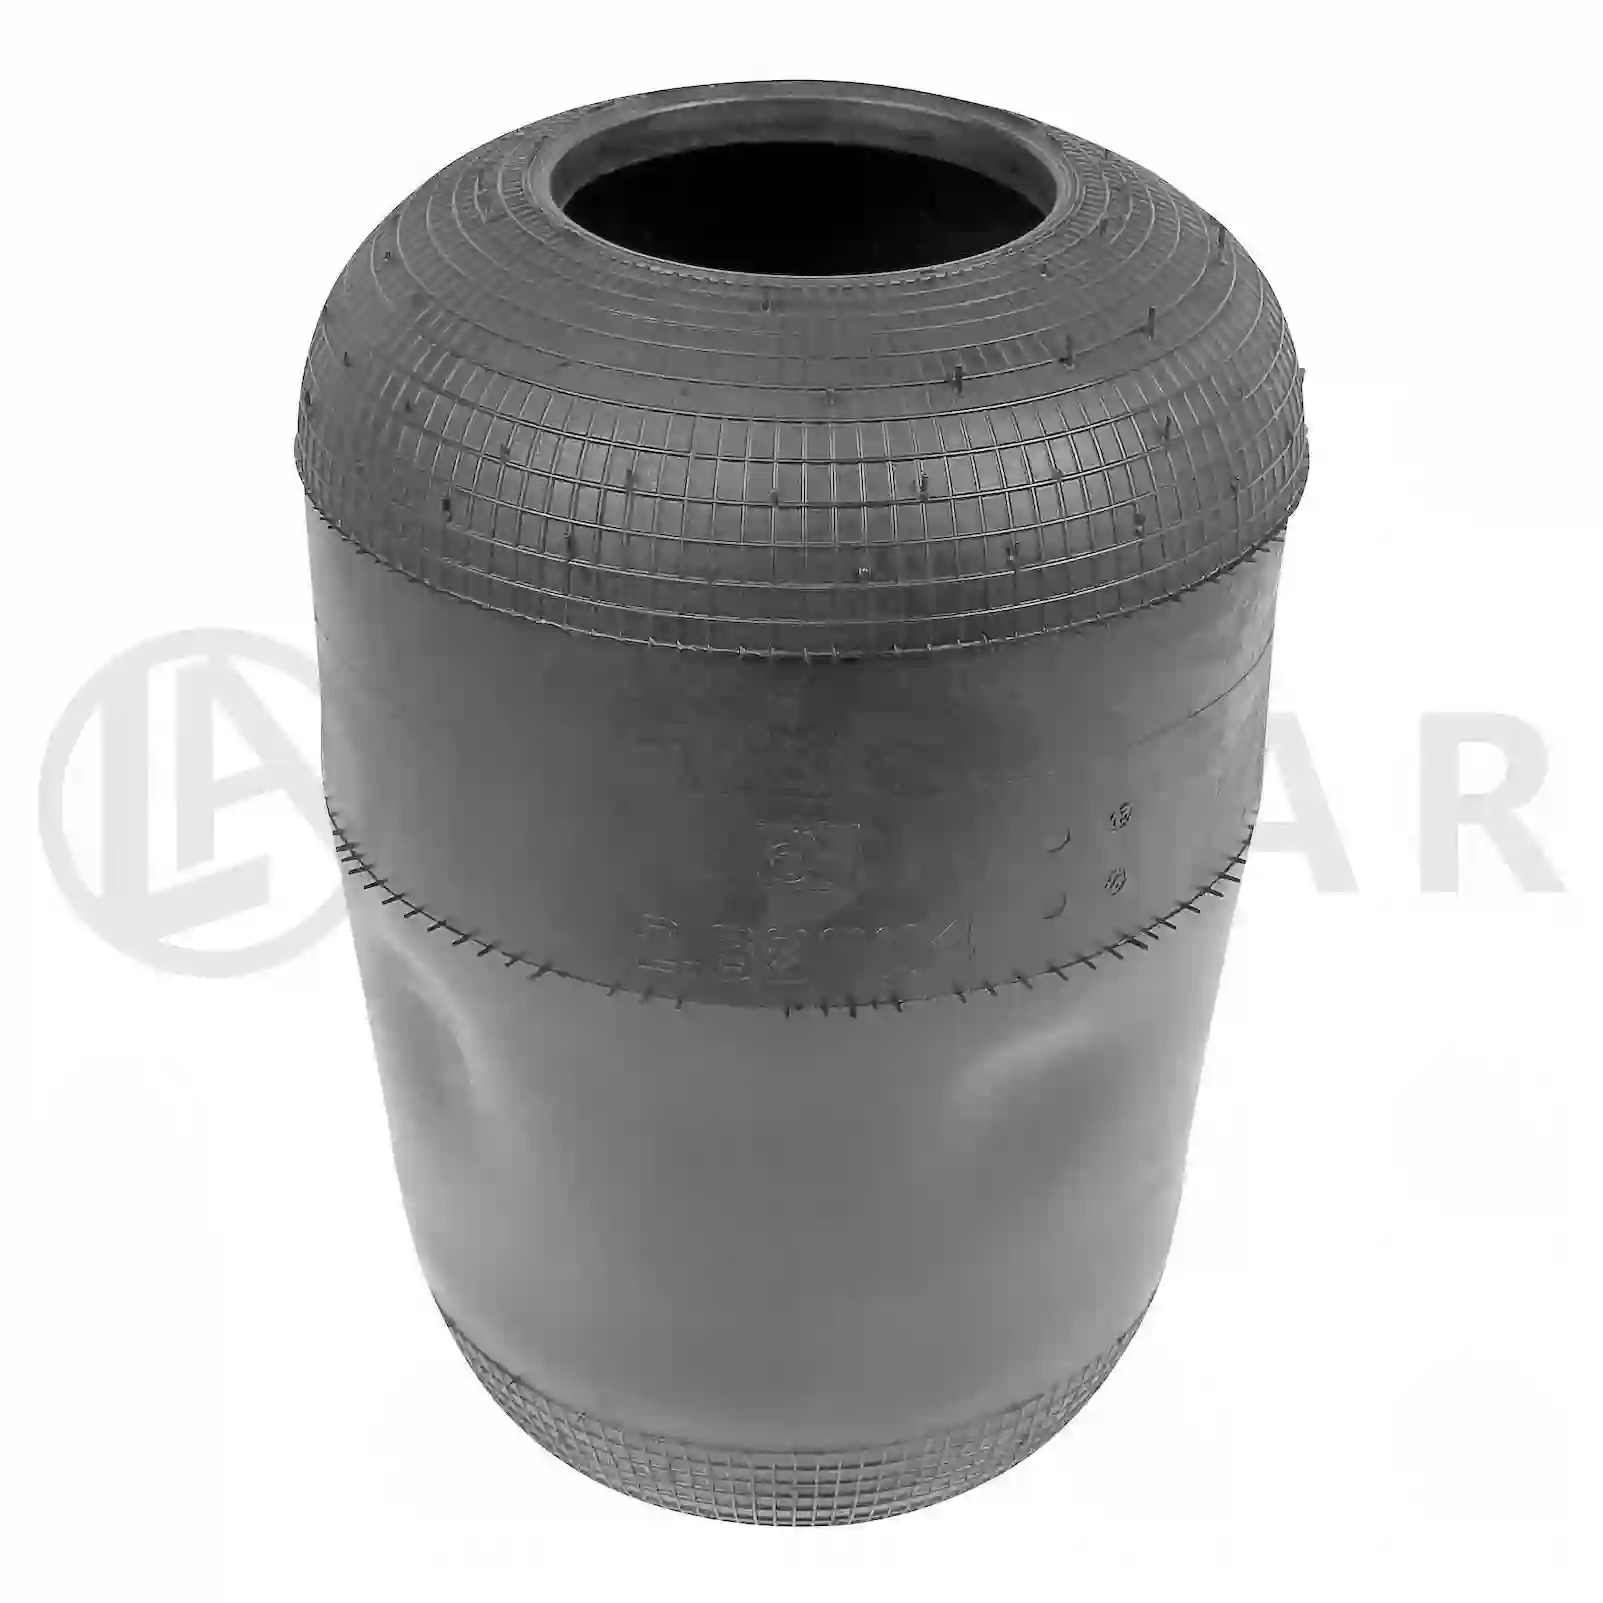 Air spring, without piston, 77728676, 5000954175, 5000954175, MLF7117, 1612455, ZG40814-0008 ||  77728676 Lastar Spare Part | Truck Spare Parts, Auotomotive Spare Parts Air spring, without piston, 77728676, 5000954175, 5000954175, MLF7117, 1612455, ZG40814-0008 ||  77728676 Lastar Spare Part | Truck Spare Parts, Auotomotive Spare Parts